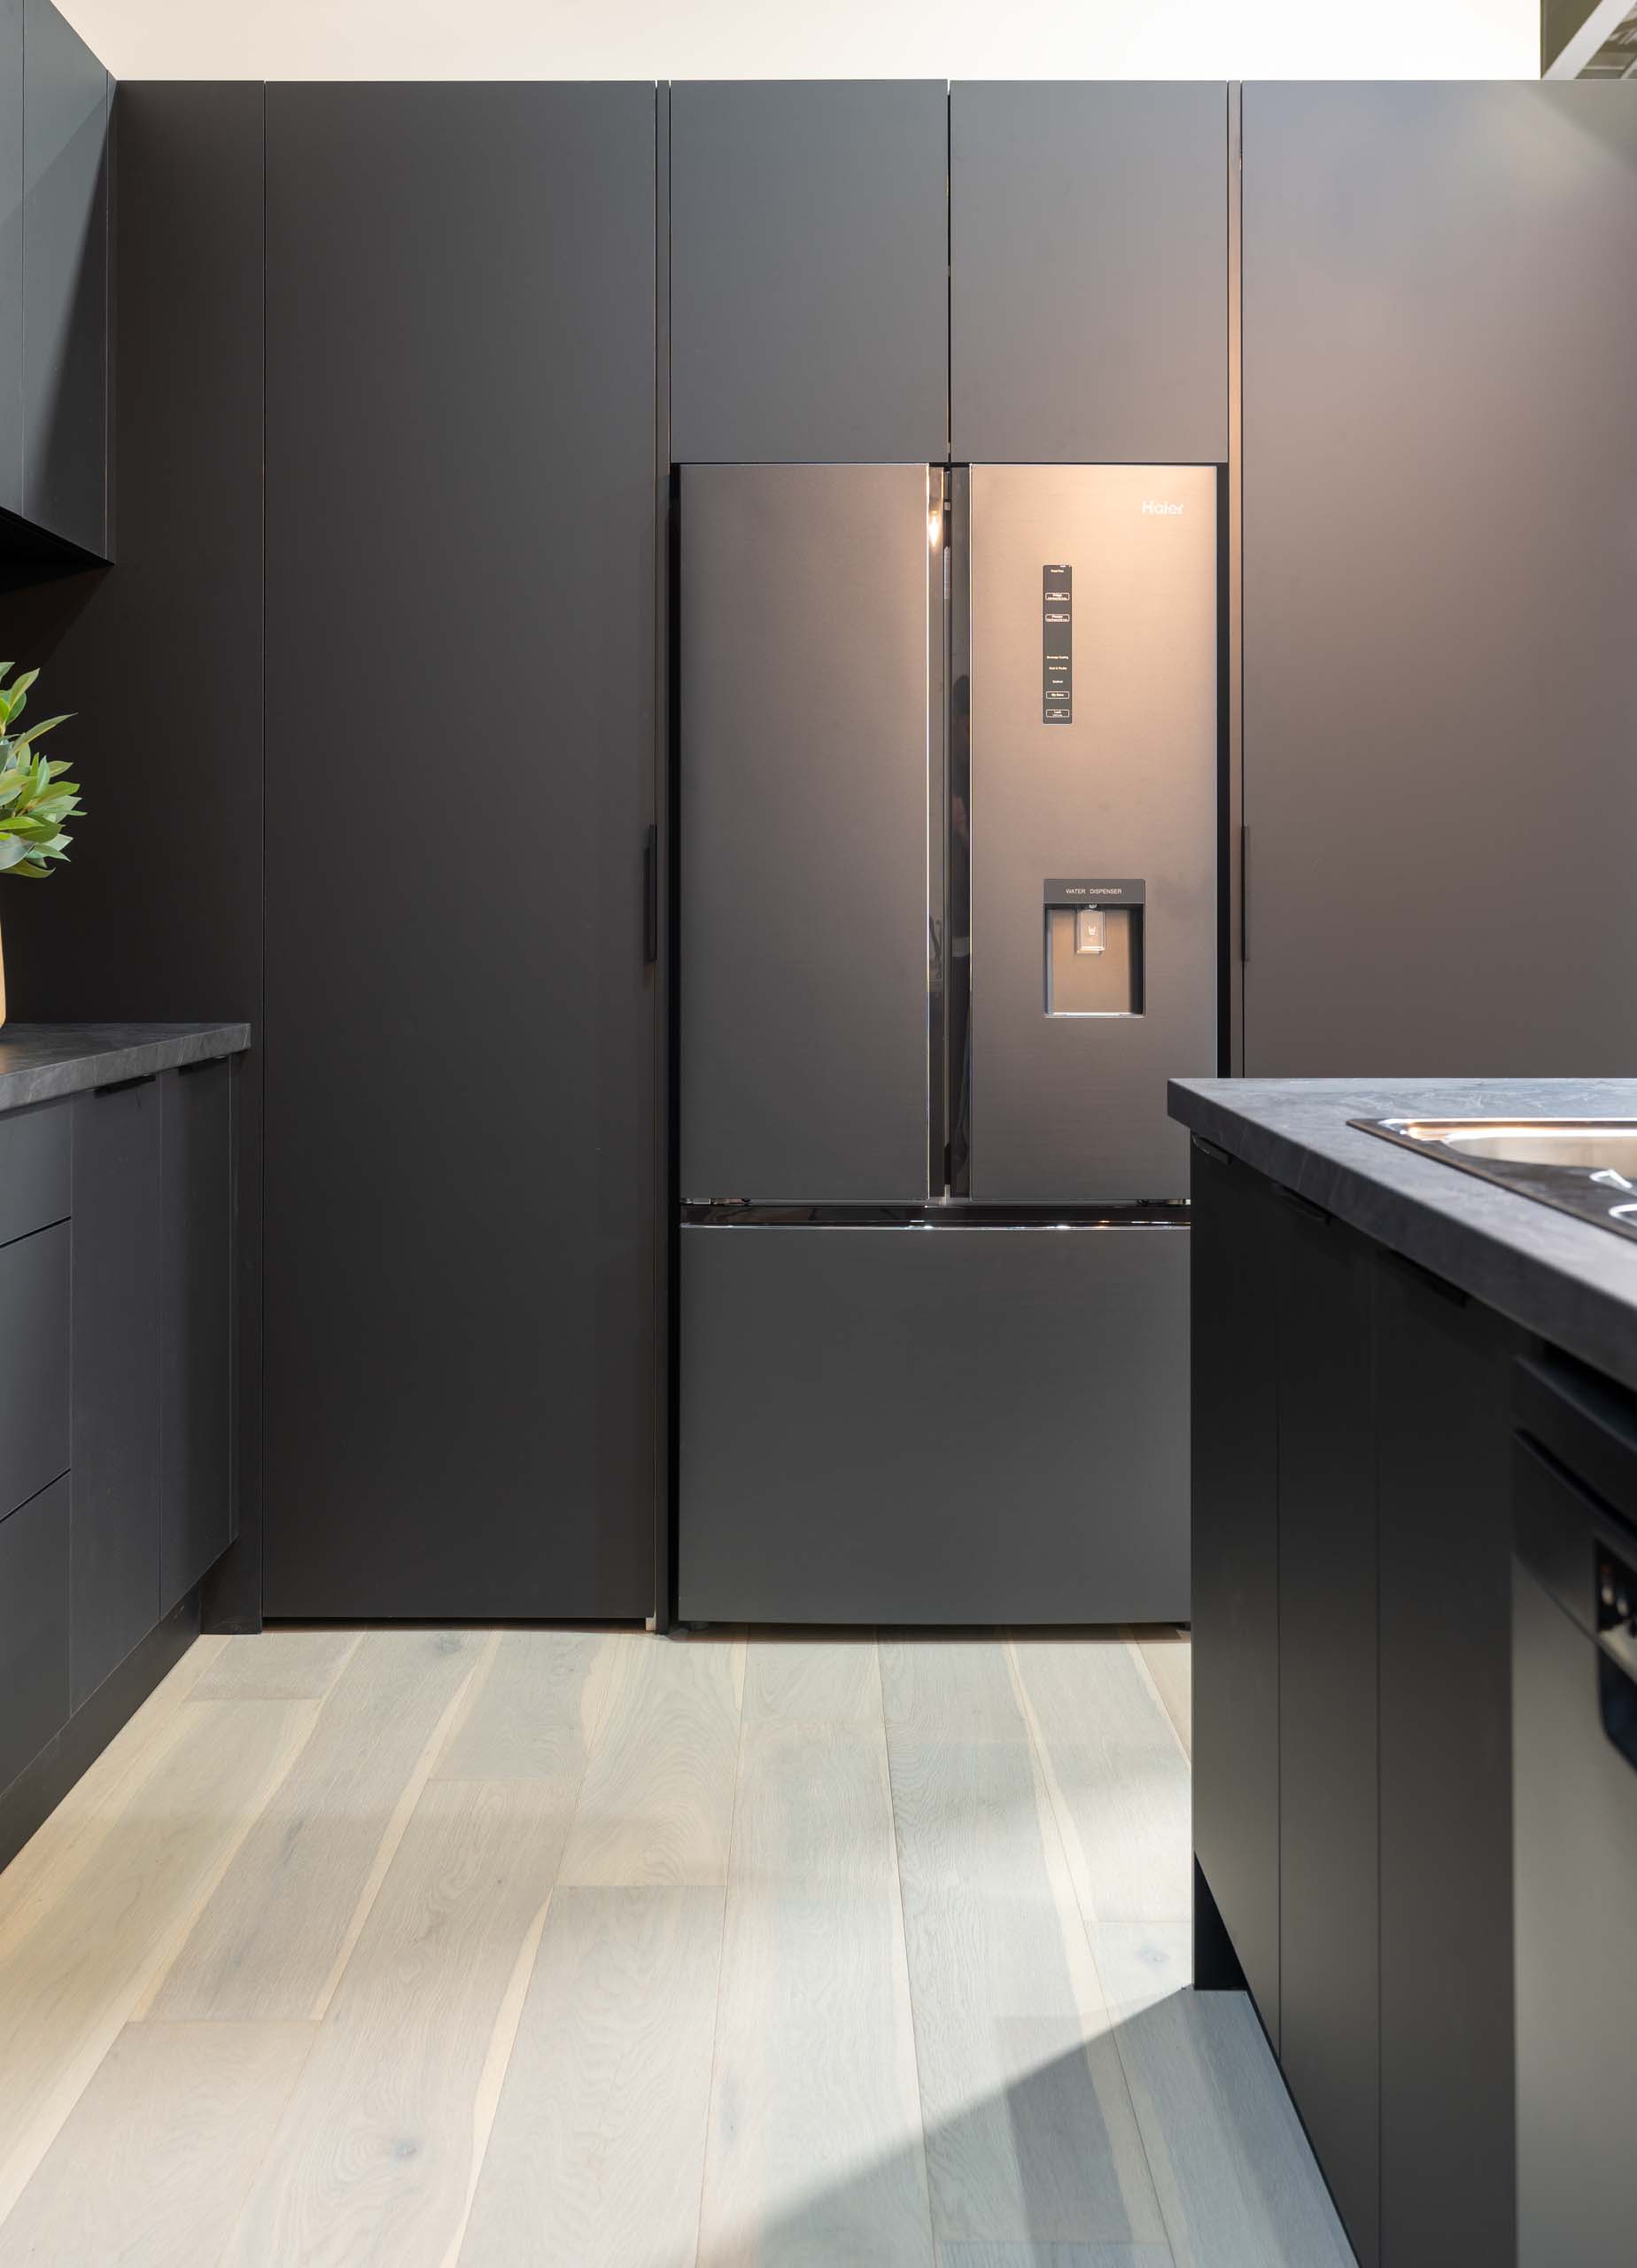 Black touch finish cabinetry with a black Haier French Door fridge